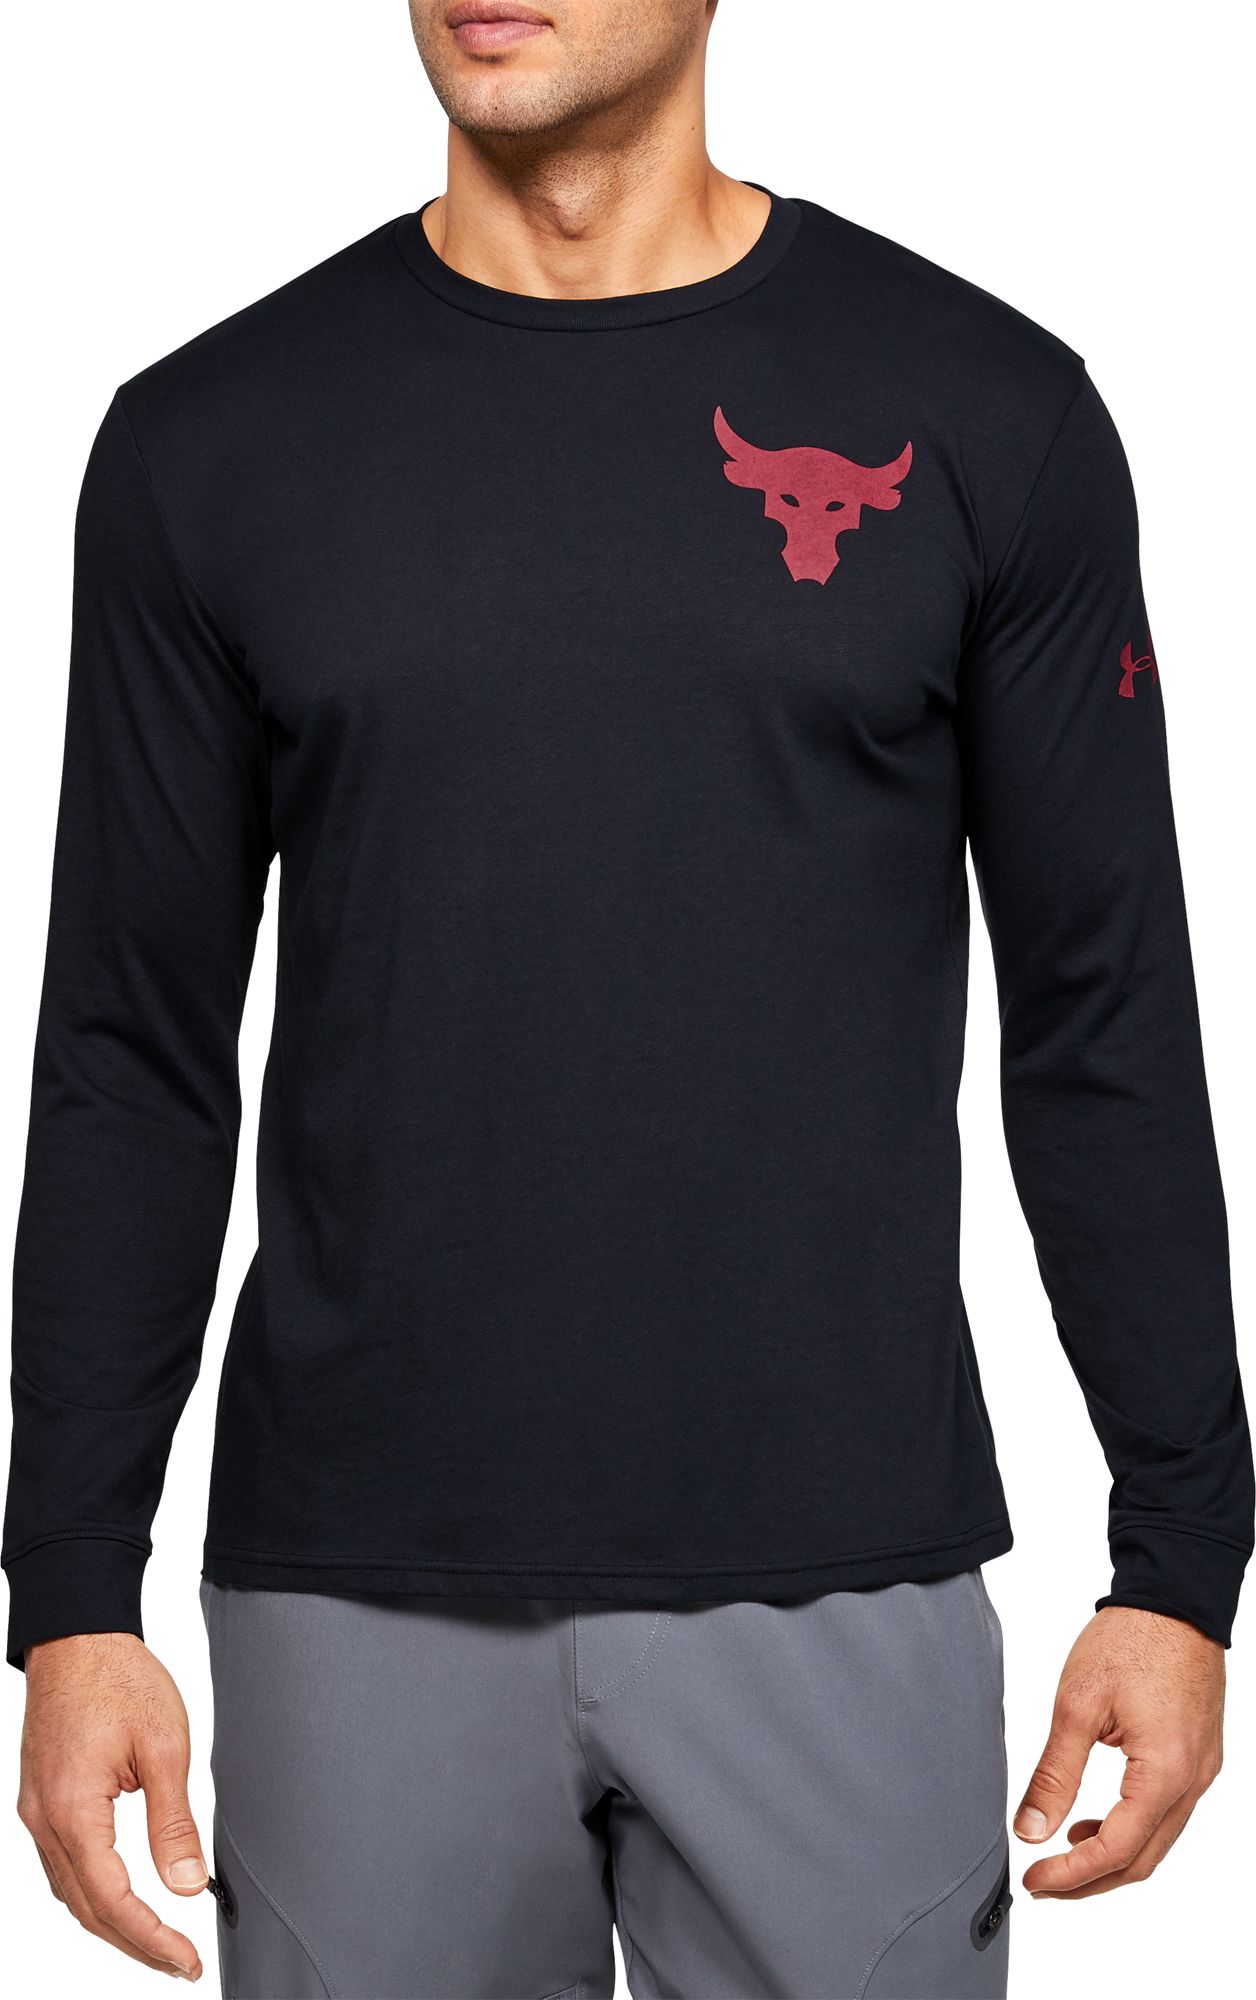 under armour long sleeve red